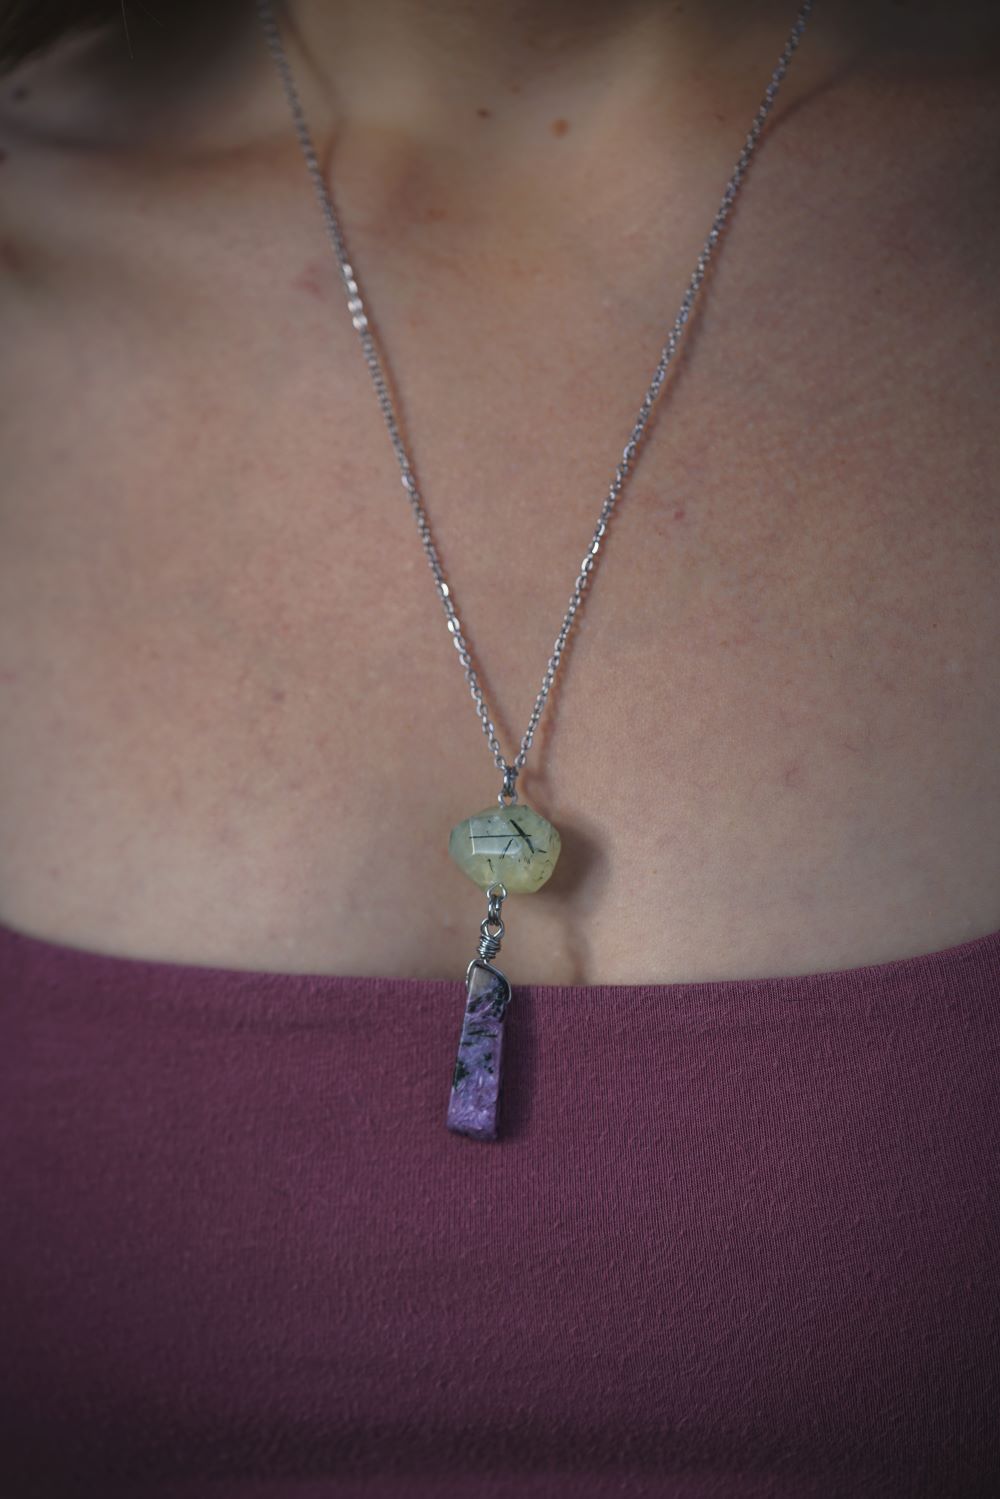 This gorgeous Prehnite stone is about .35" long, while the Charoite is approximately .65" long, both suspended from a 20" long stainless steel chain. In addition, I infuse each of my handcrafted crystal designs with Reiki energy and charge and clear them with sunlight, moonlight, and sage, which amplifies not only the stones but your intentions as well. This necklace came to be for a specific person and situation, there are no coincidences, so if you stumbled across this page, maybe it was meant for you:)